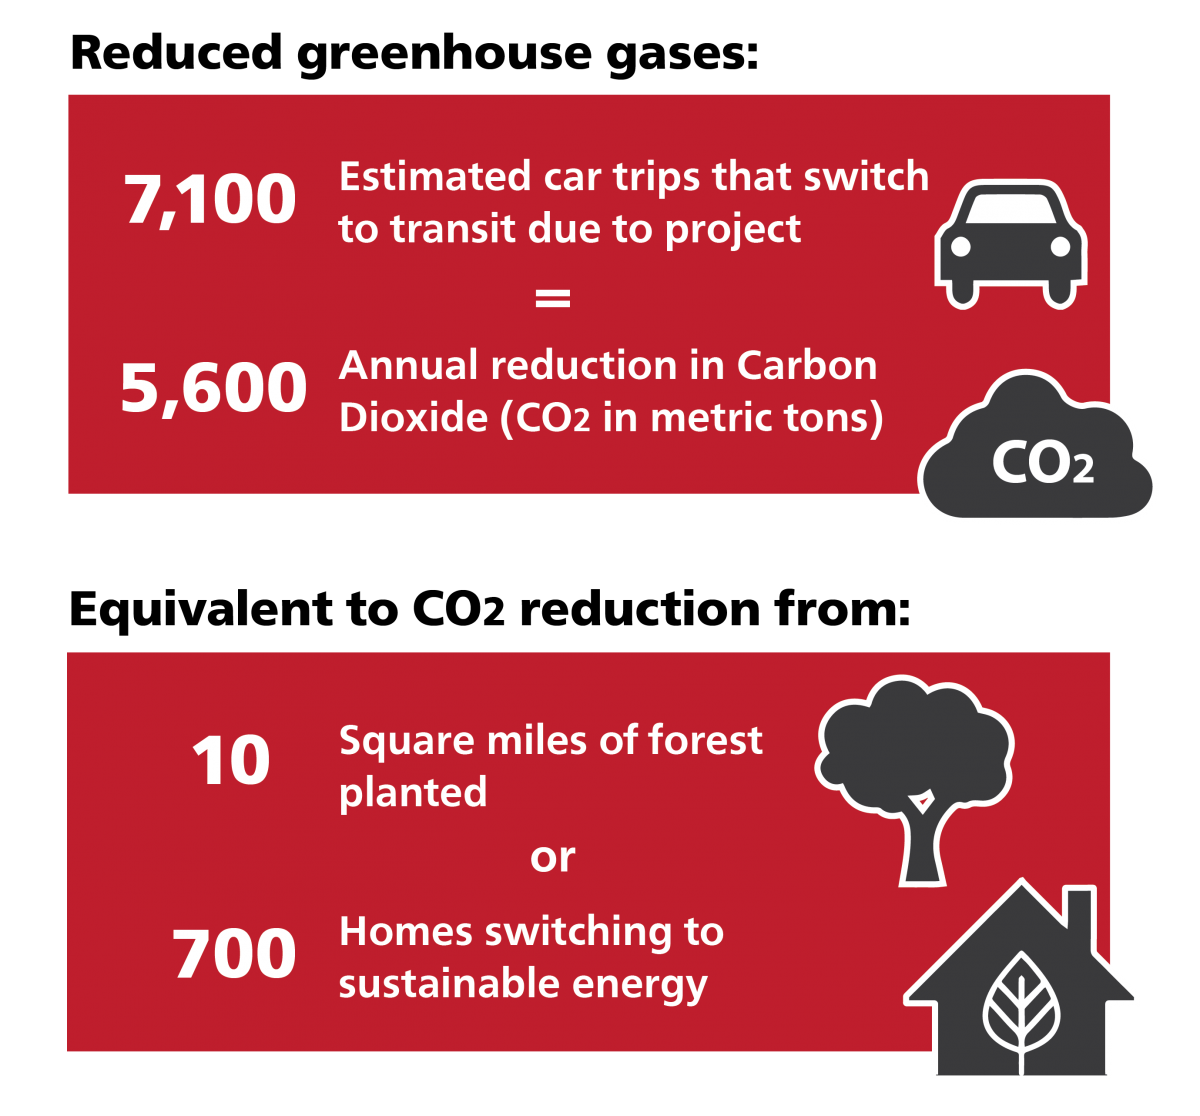 Infographic showing the environmental benefits of the Geary Boulevard Improvement Project. 7,100 car trips are estimated to convert to transit if the project is implemented, which would result in an annual reduction of 5,600 metric tons of CO2. That would be the equivalent of 10 square miles of forest planted, or 700 homes switching to sustainable energy. 